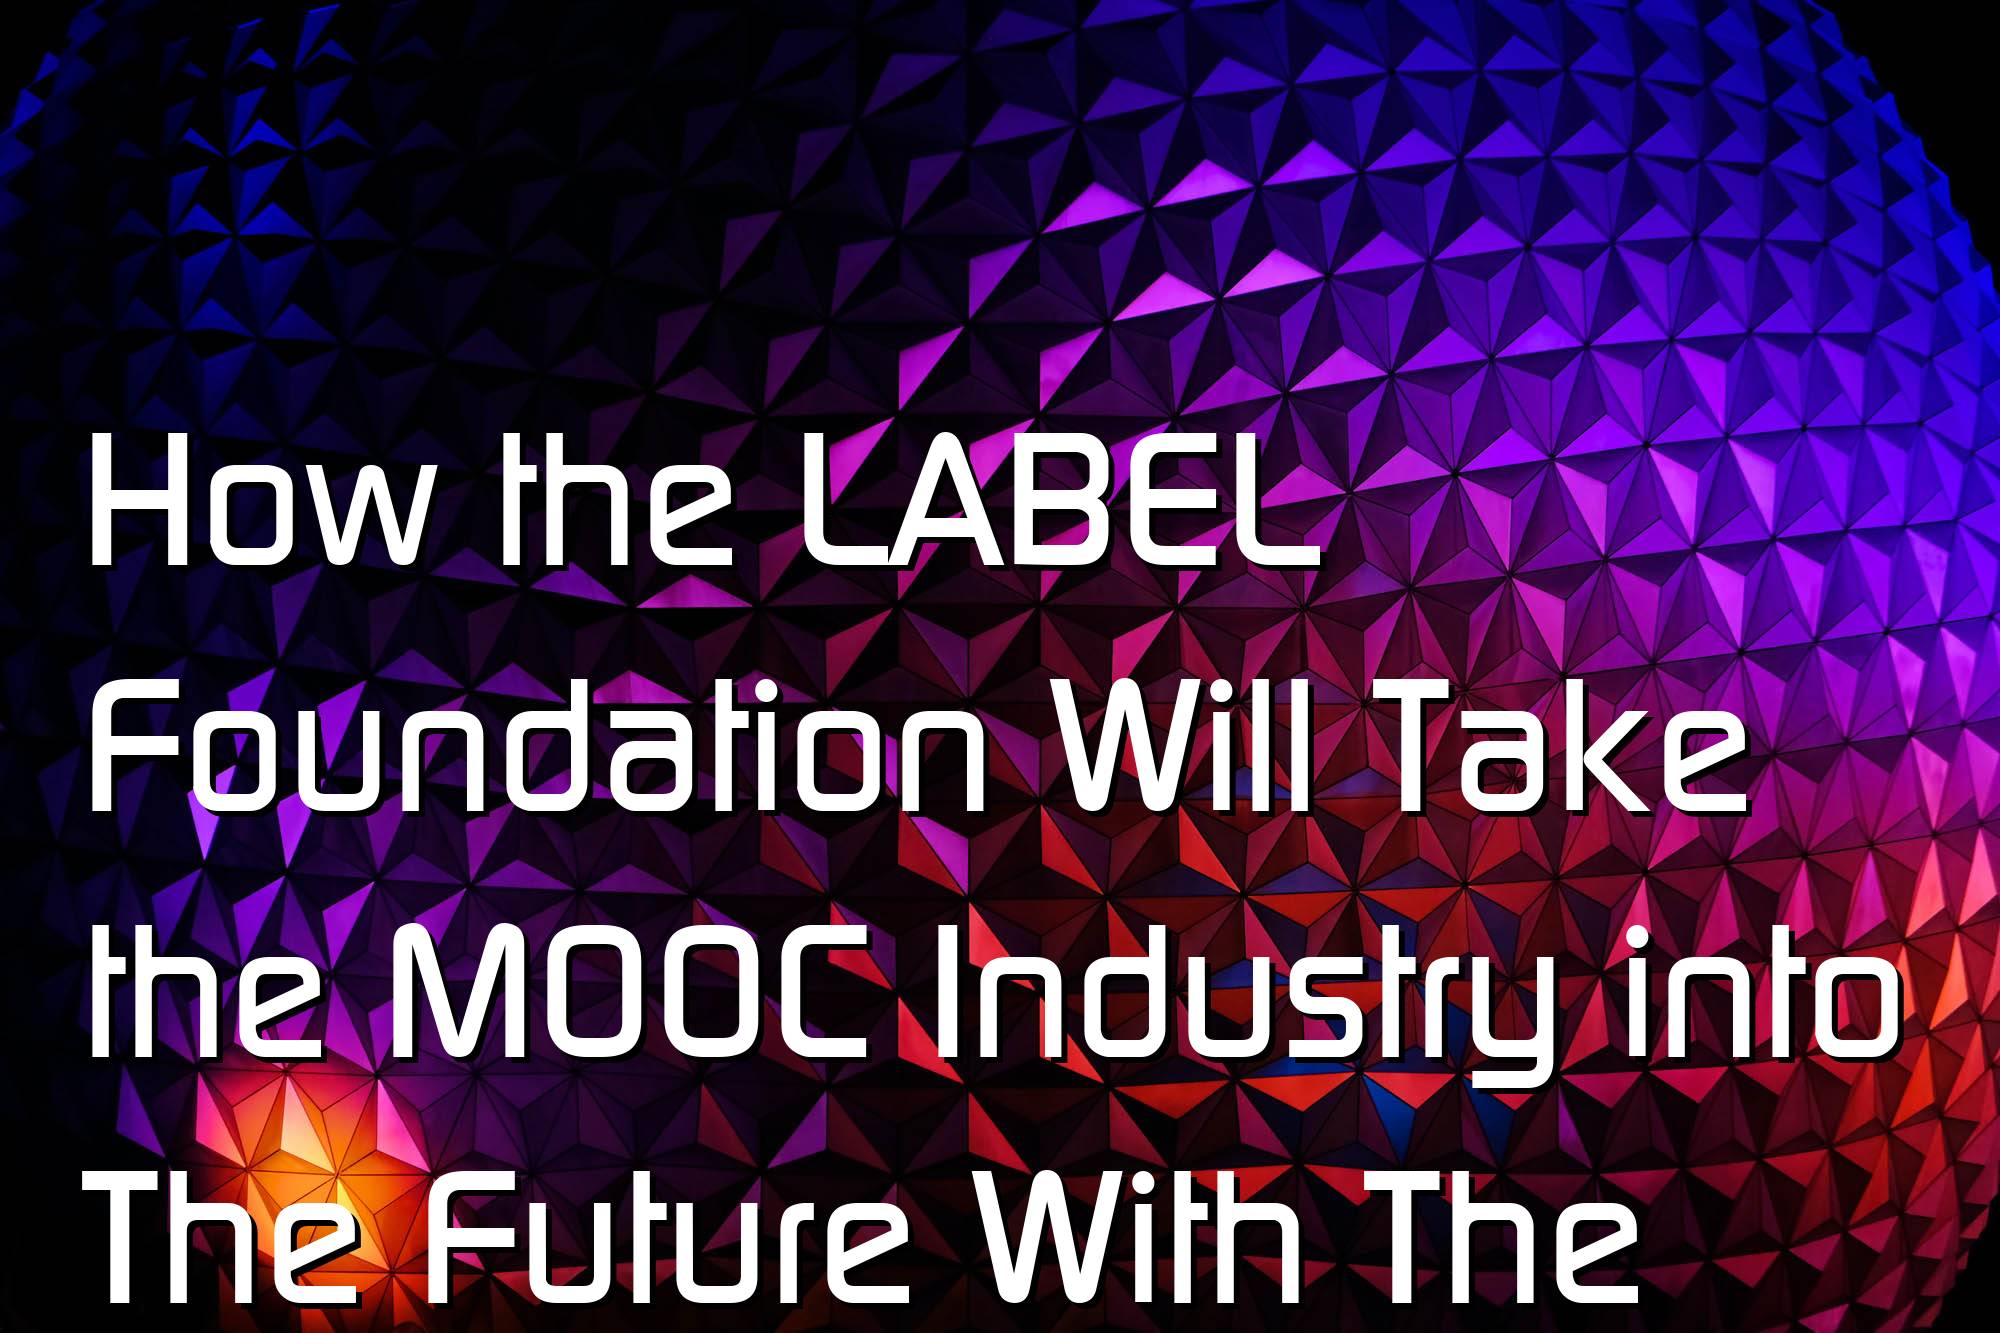 @$62867: How the LABEL Foundation Will Take the MOOC Industry into The Future With The Ethereum Network After Raising $1.0 Million